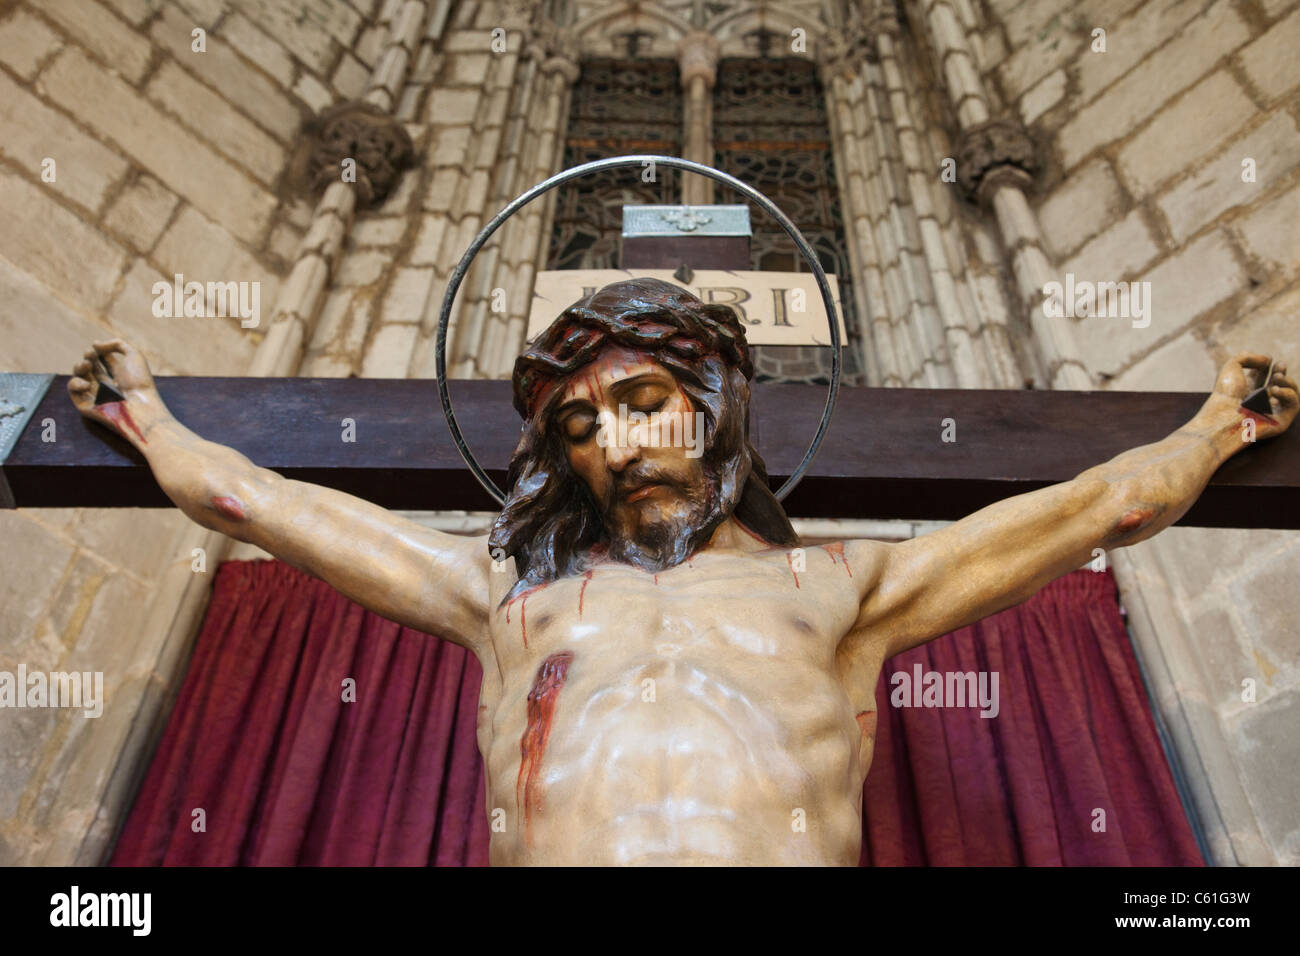 Spain, Barcelona, Barcelona Cathedral, The Cloisters, Jesus Christ on the Cross Stock Photo